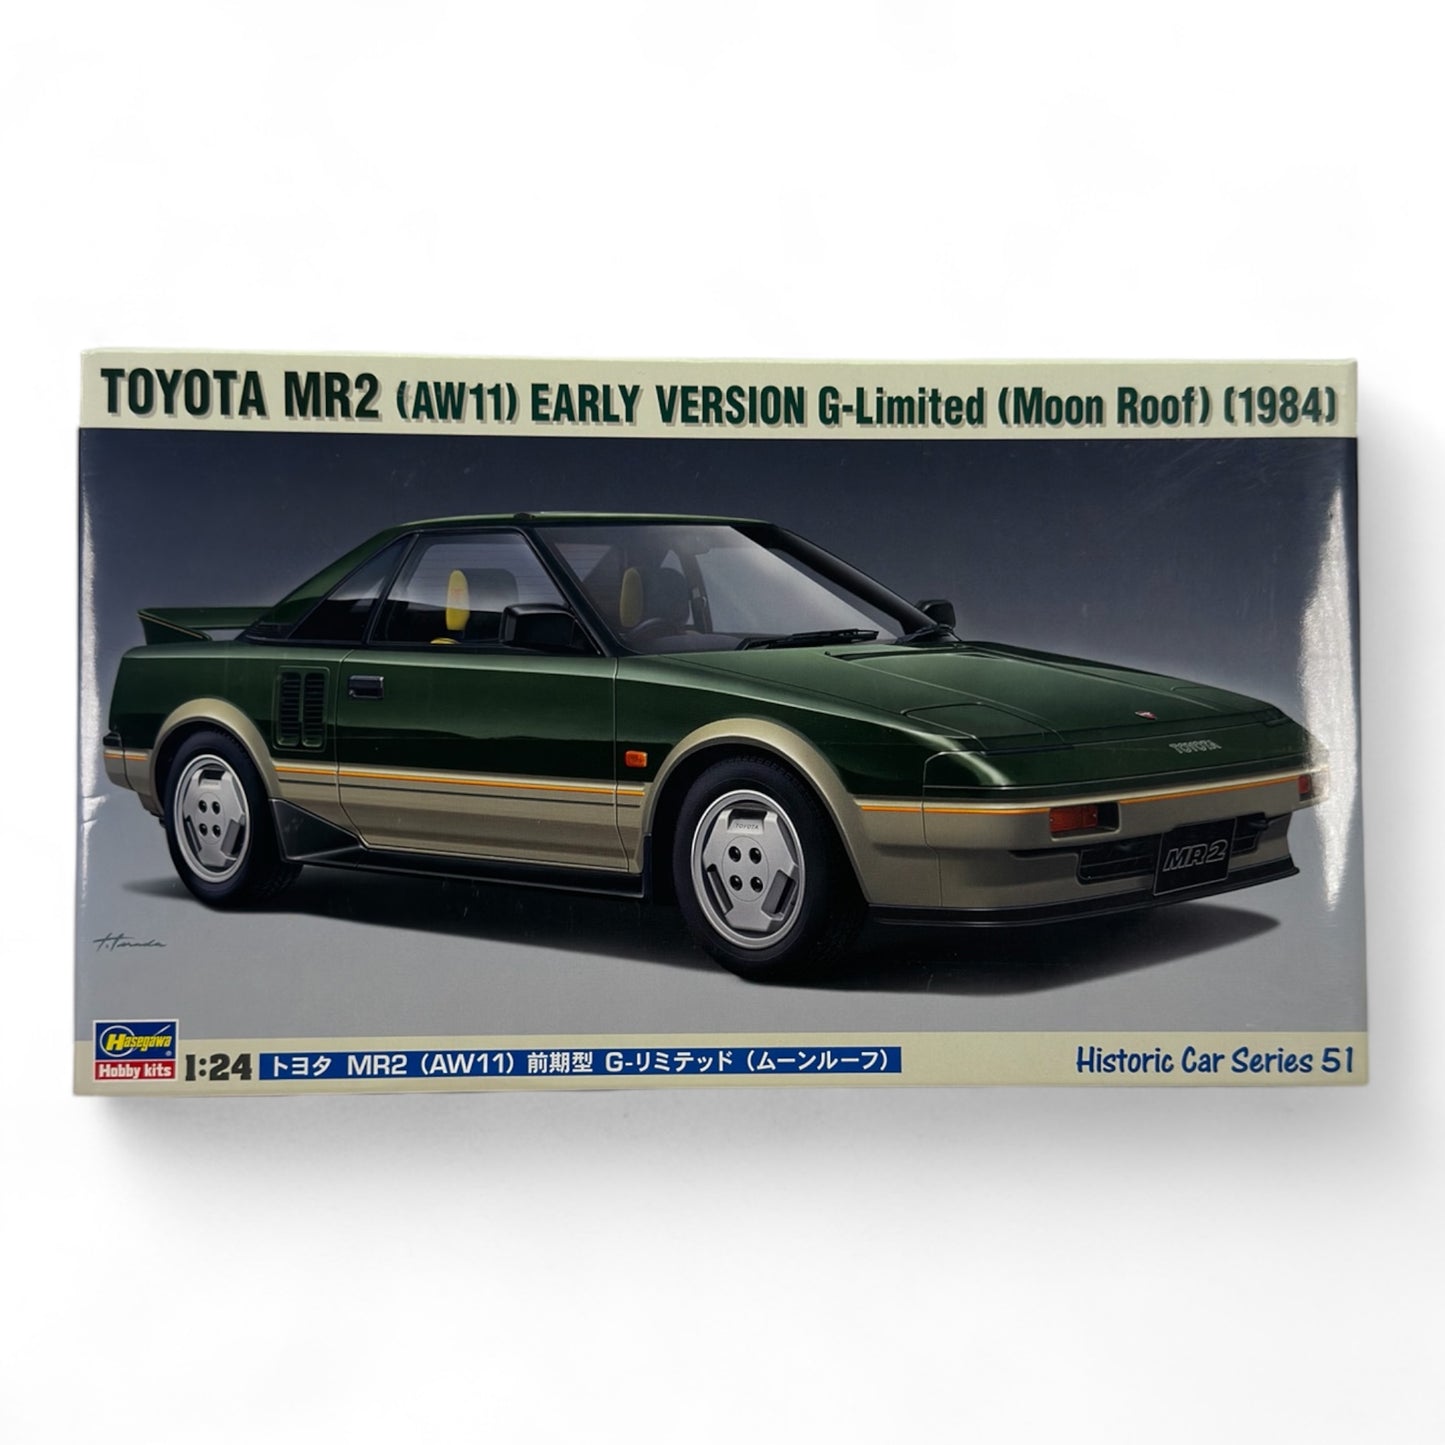 Toyota MR2 (AW11) Early Version G-limited (Moon Roof) (1984) 1/24 - Hasegawa